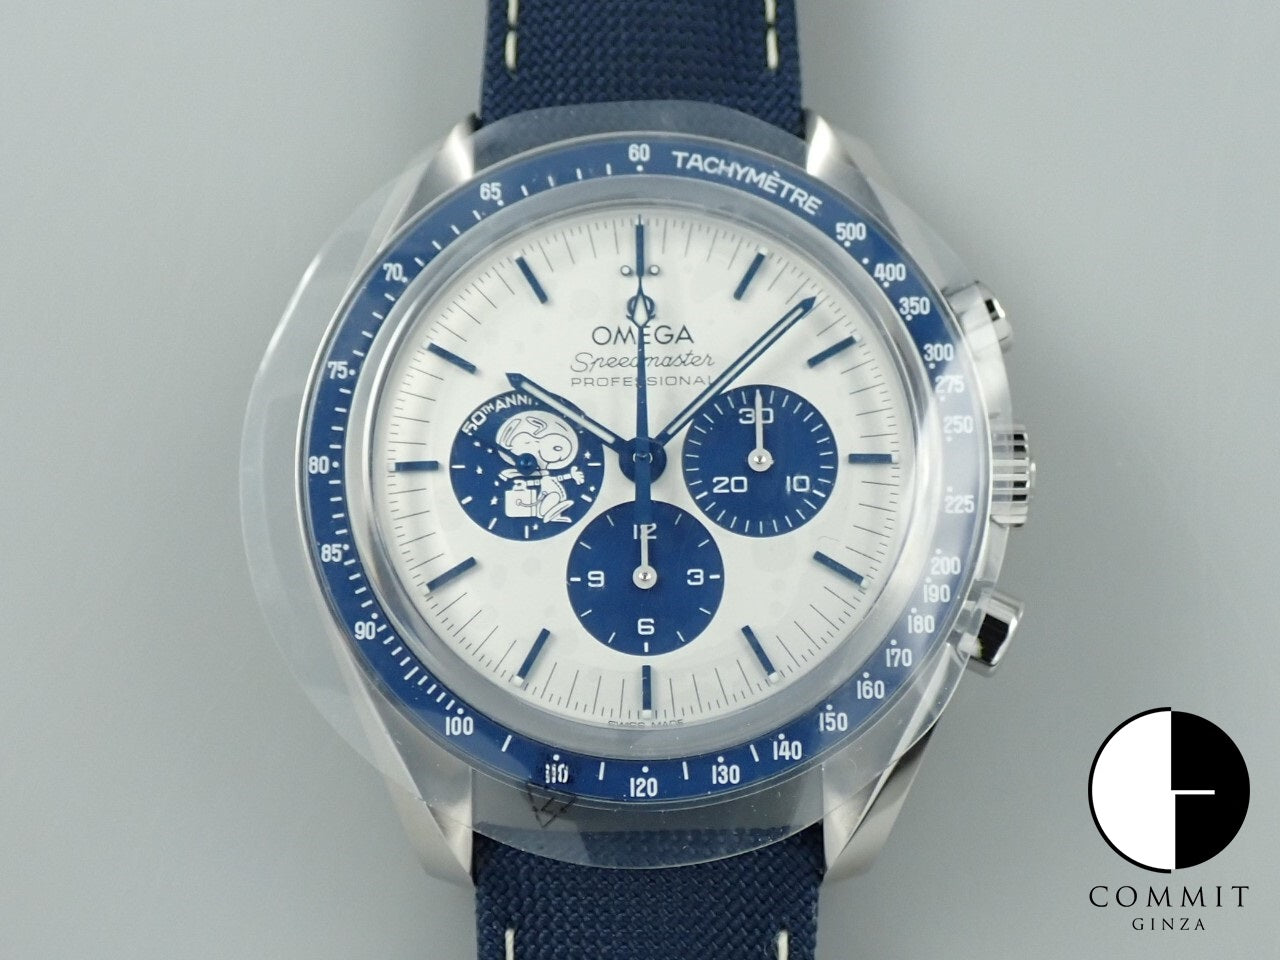 Omega Speedmaster Commemorative Model Co-Axial Master Chronometer Chronograph 42MM Ref.310.32.42.50.02.001 SS Silver Dial